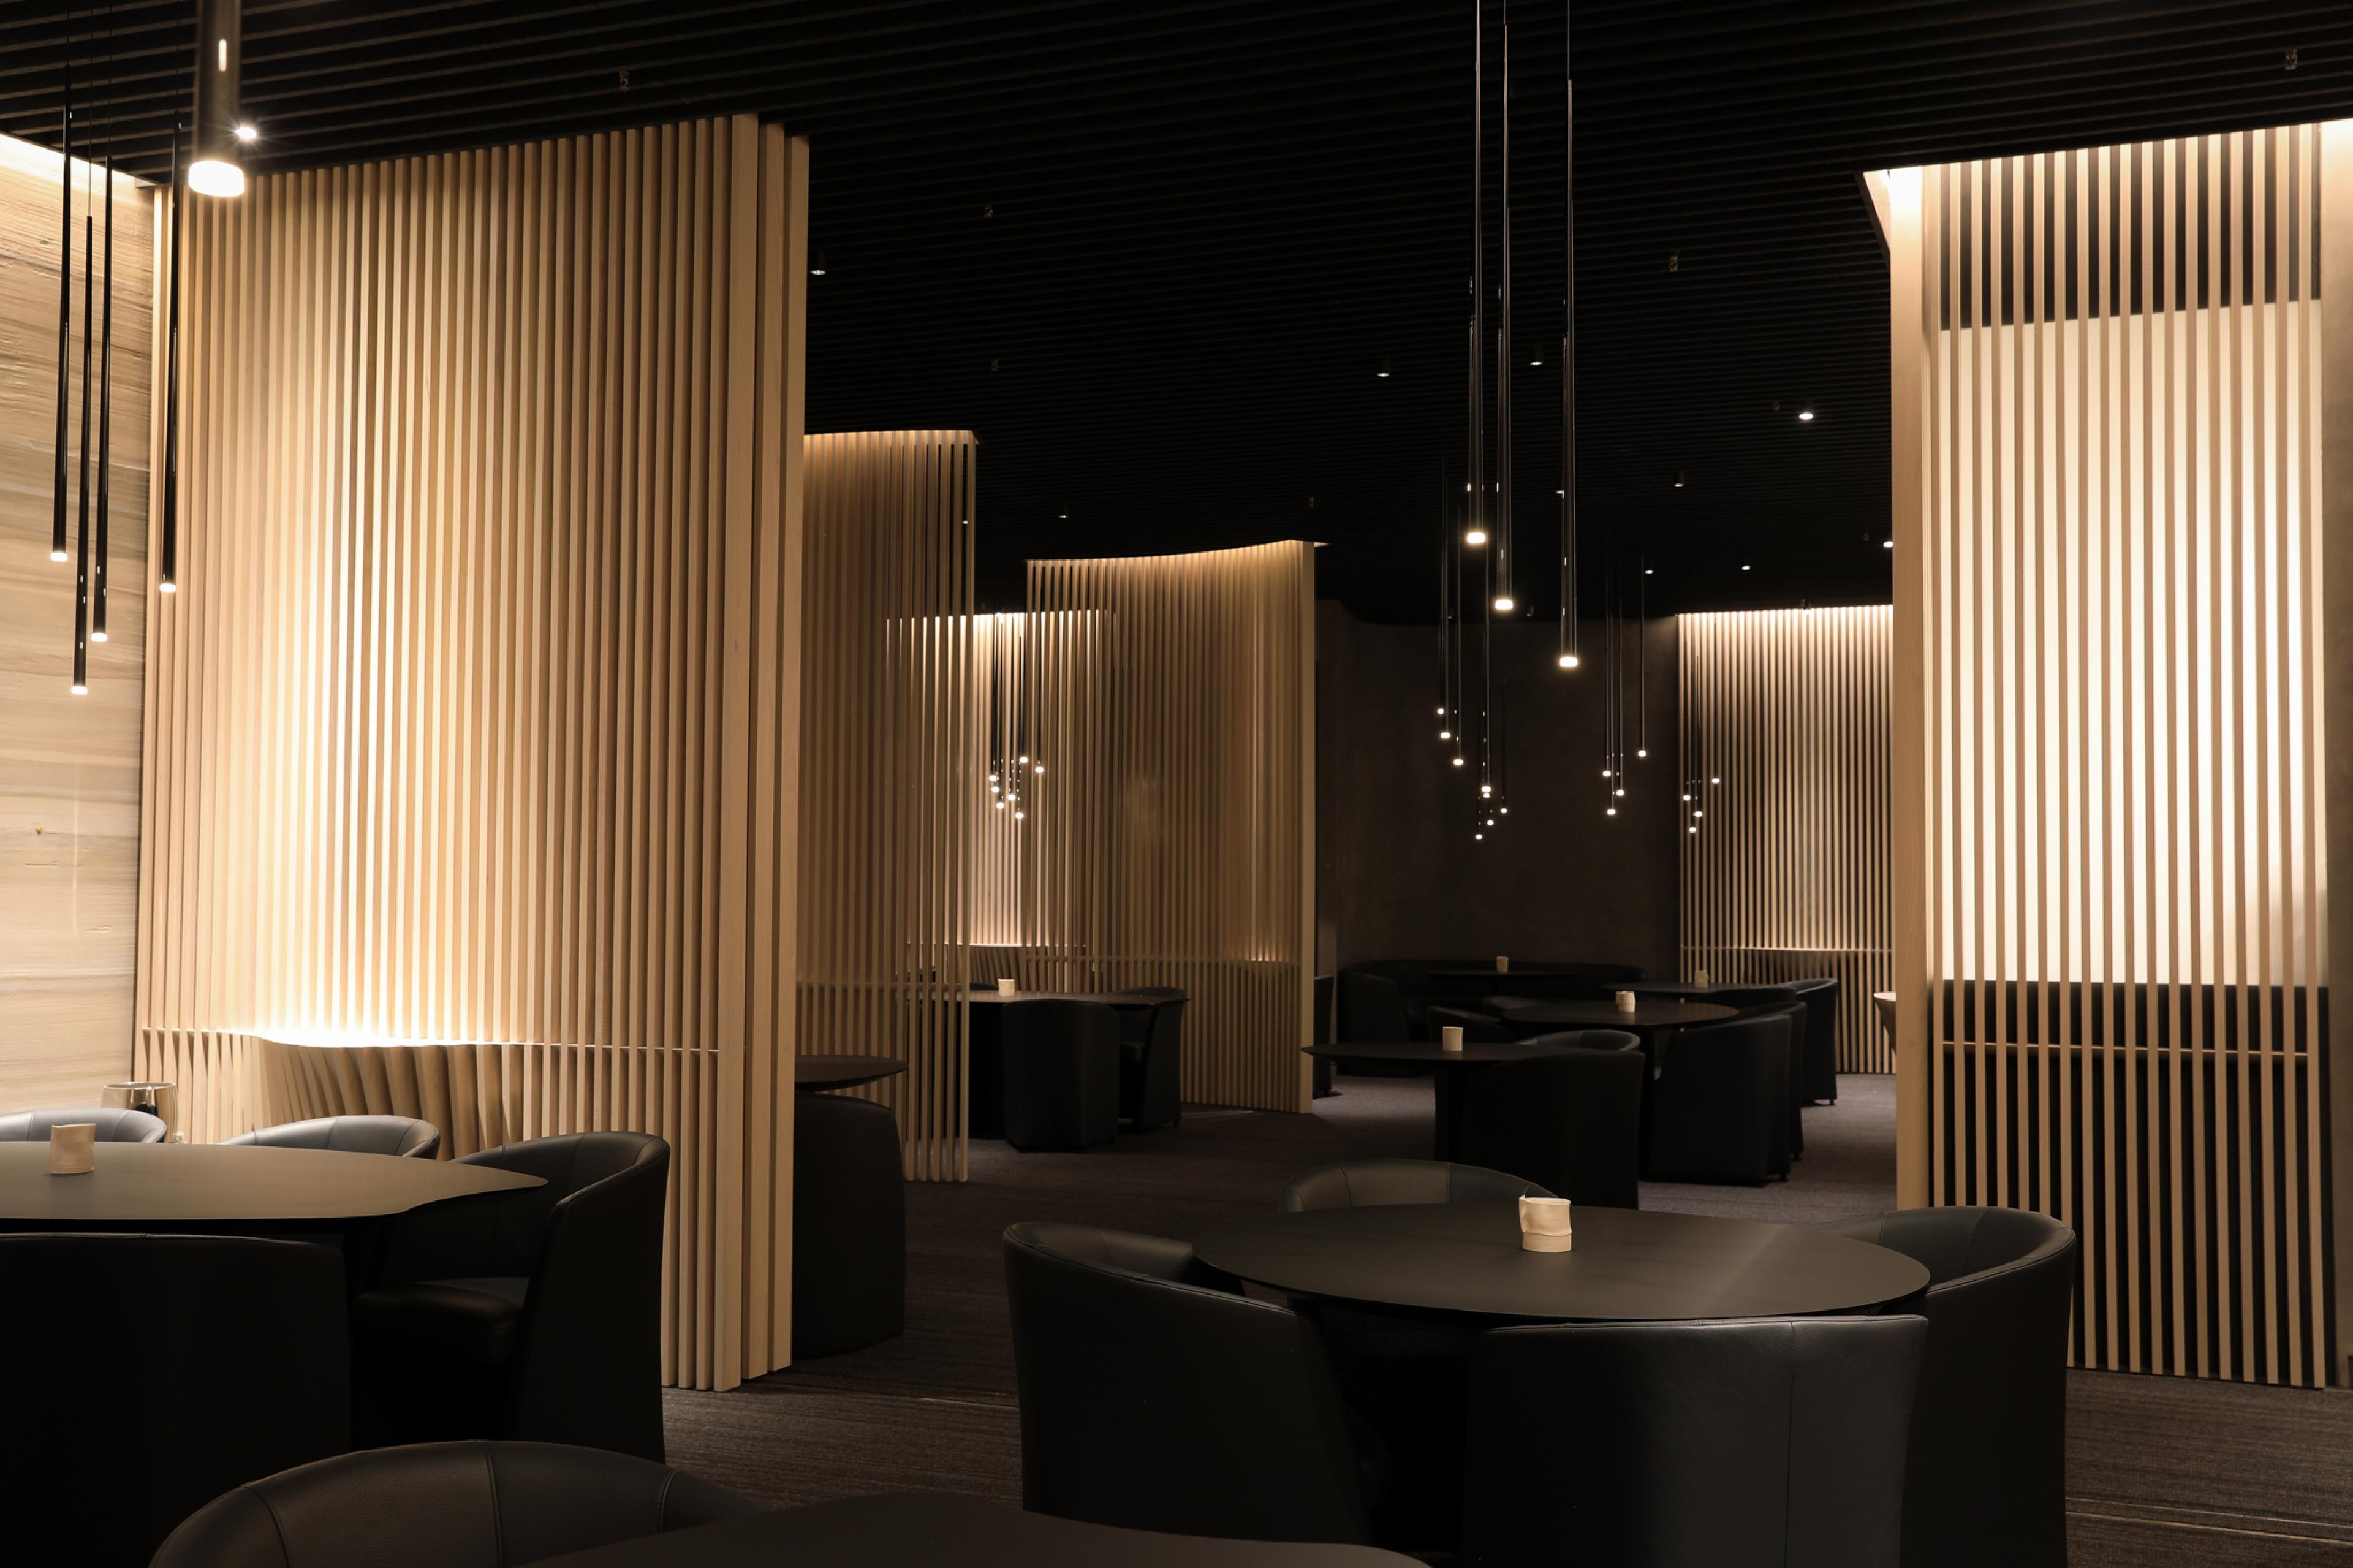 interior of restaurant with dark furniture, lighting and walls and wood sculptures